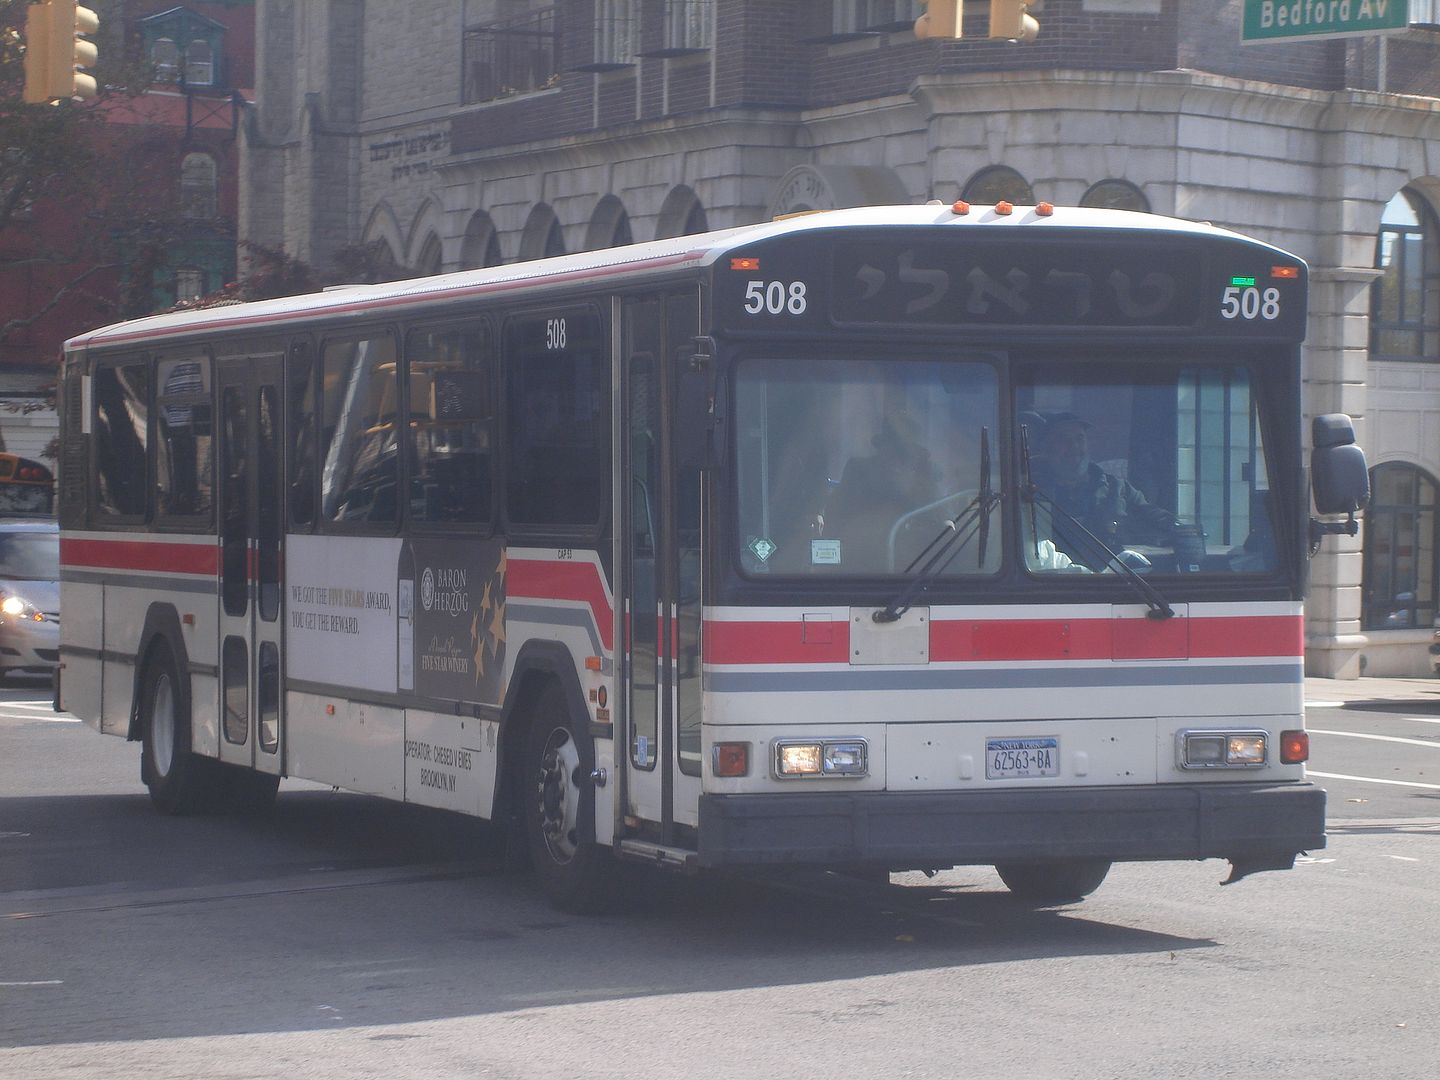 Williamsburg Trolley 508, Gillig Phantom (ex-Avis Rent-a-car shuttle) on Trolley route(Owned by Private transportation, operated by Chesed V EMES)